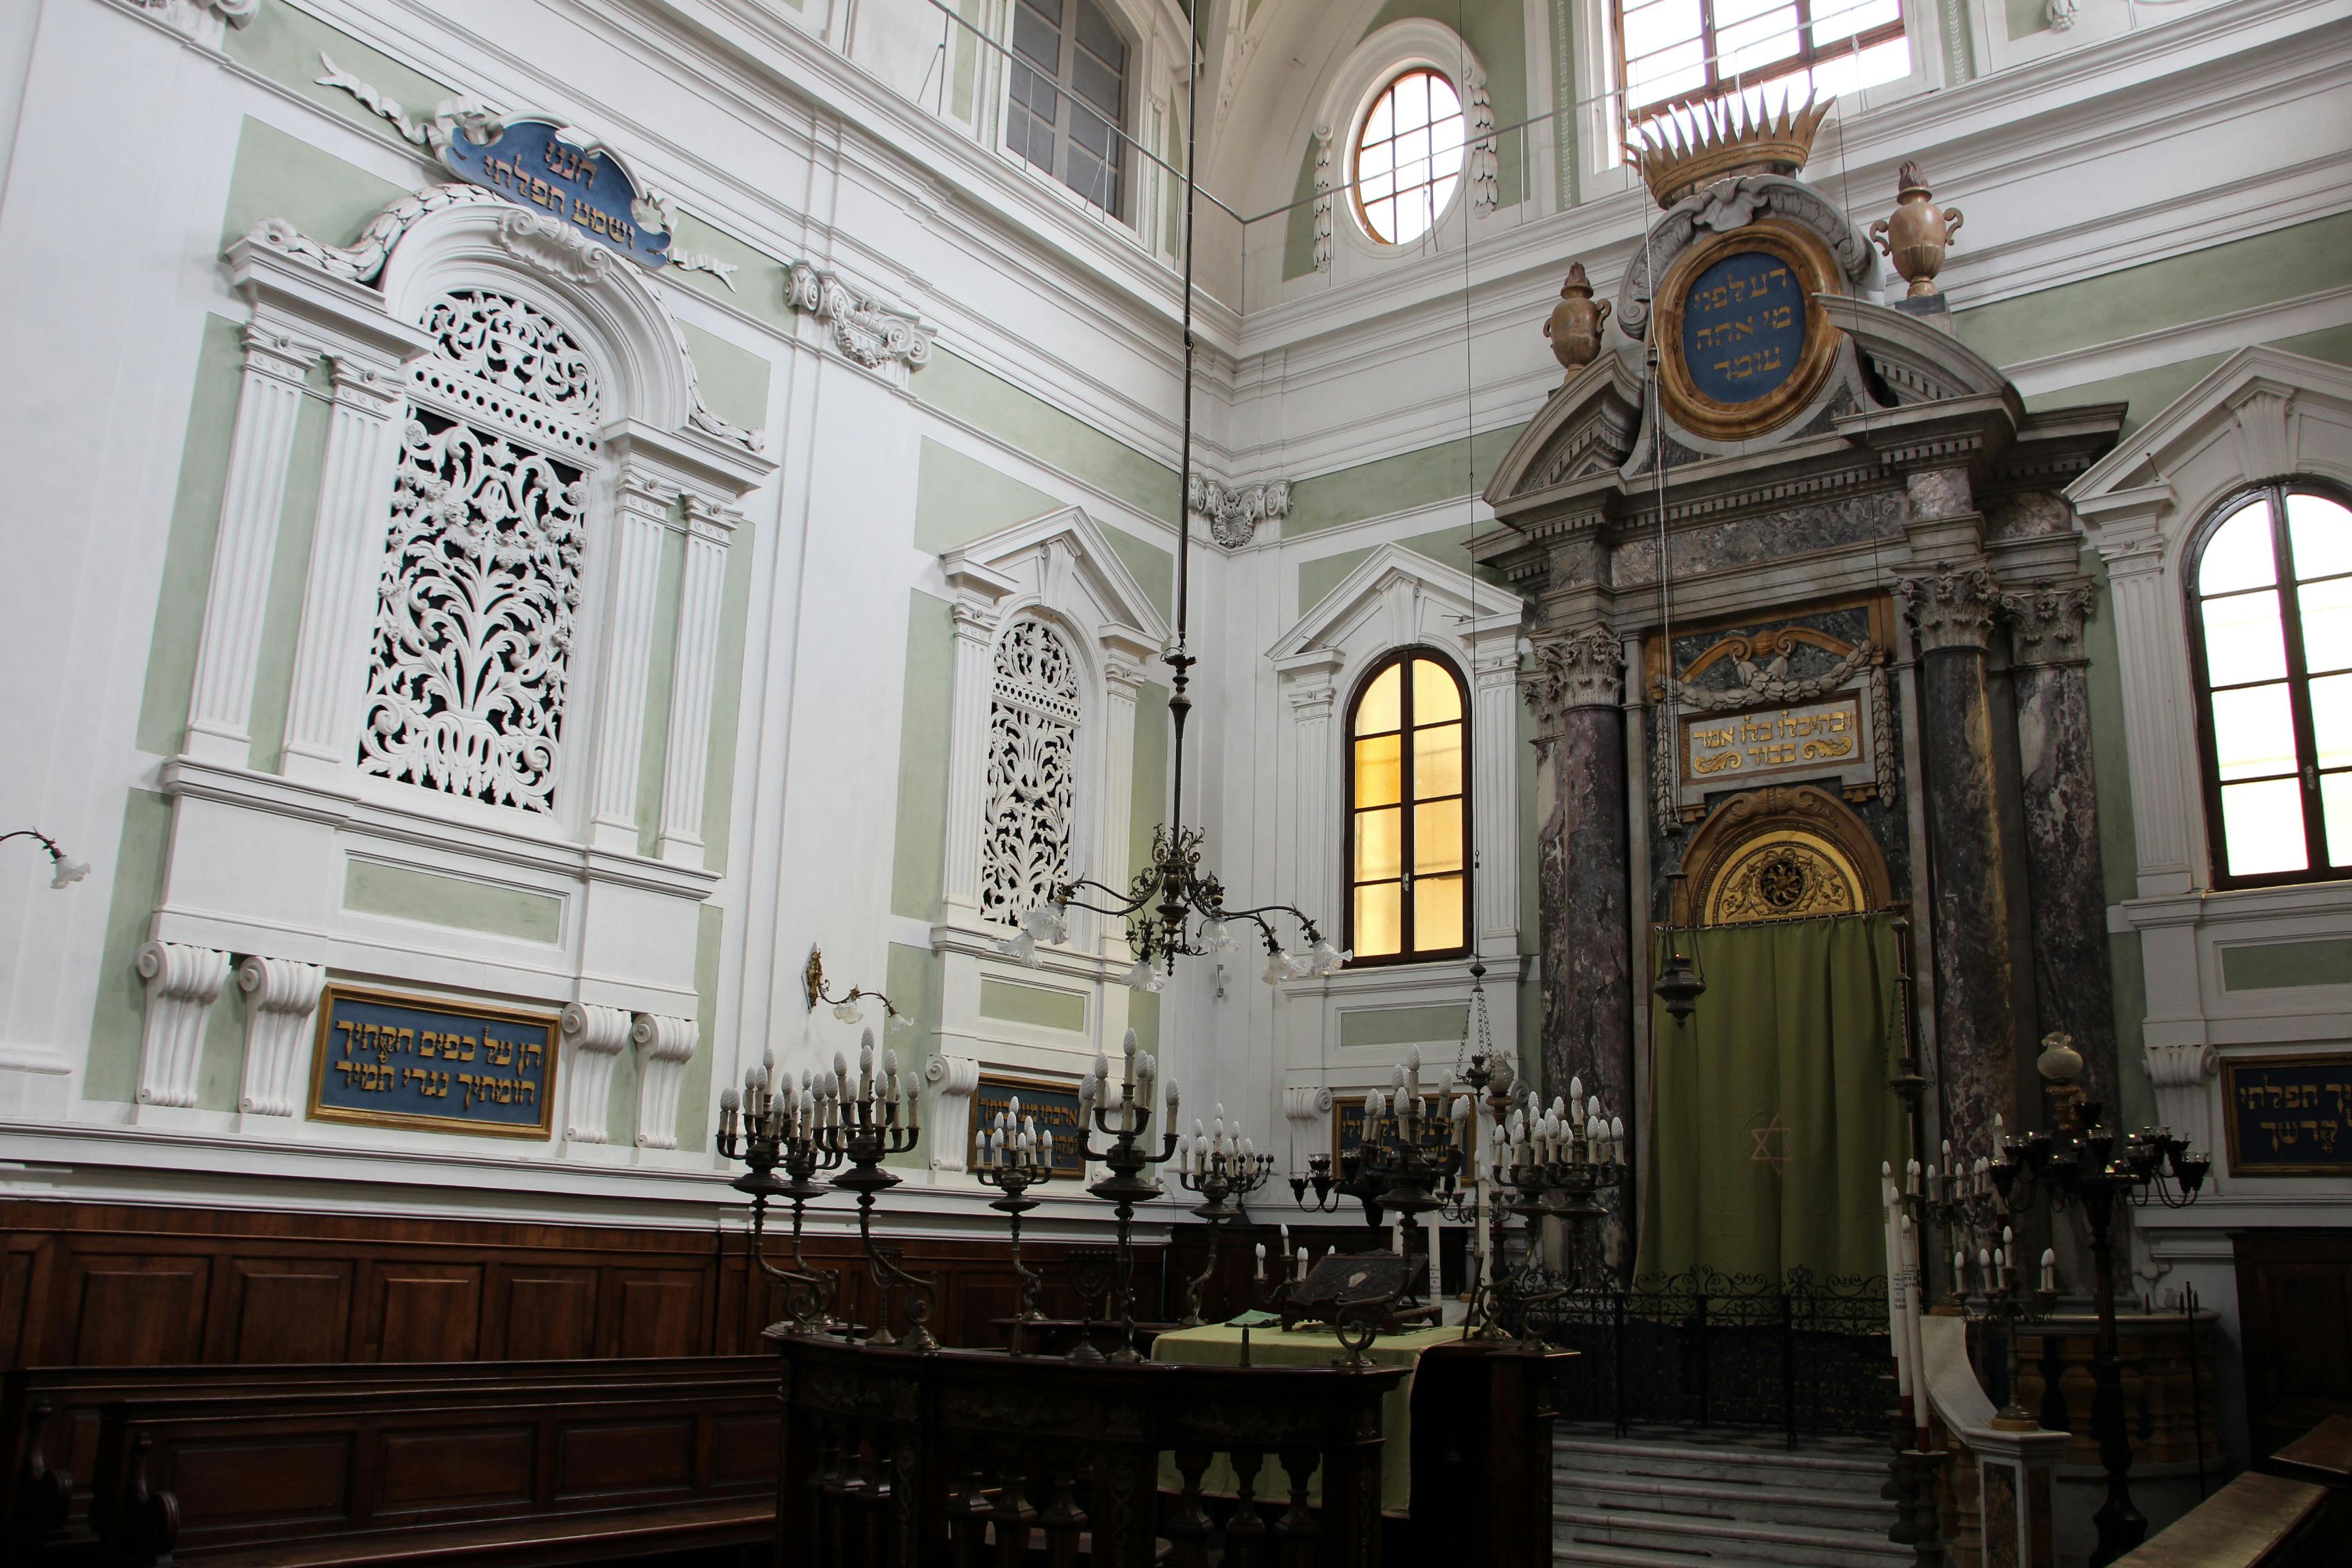 Tickets to the Synagogue of Siena